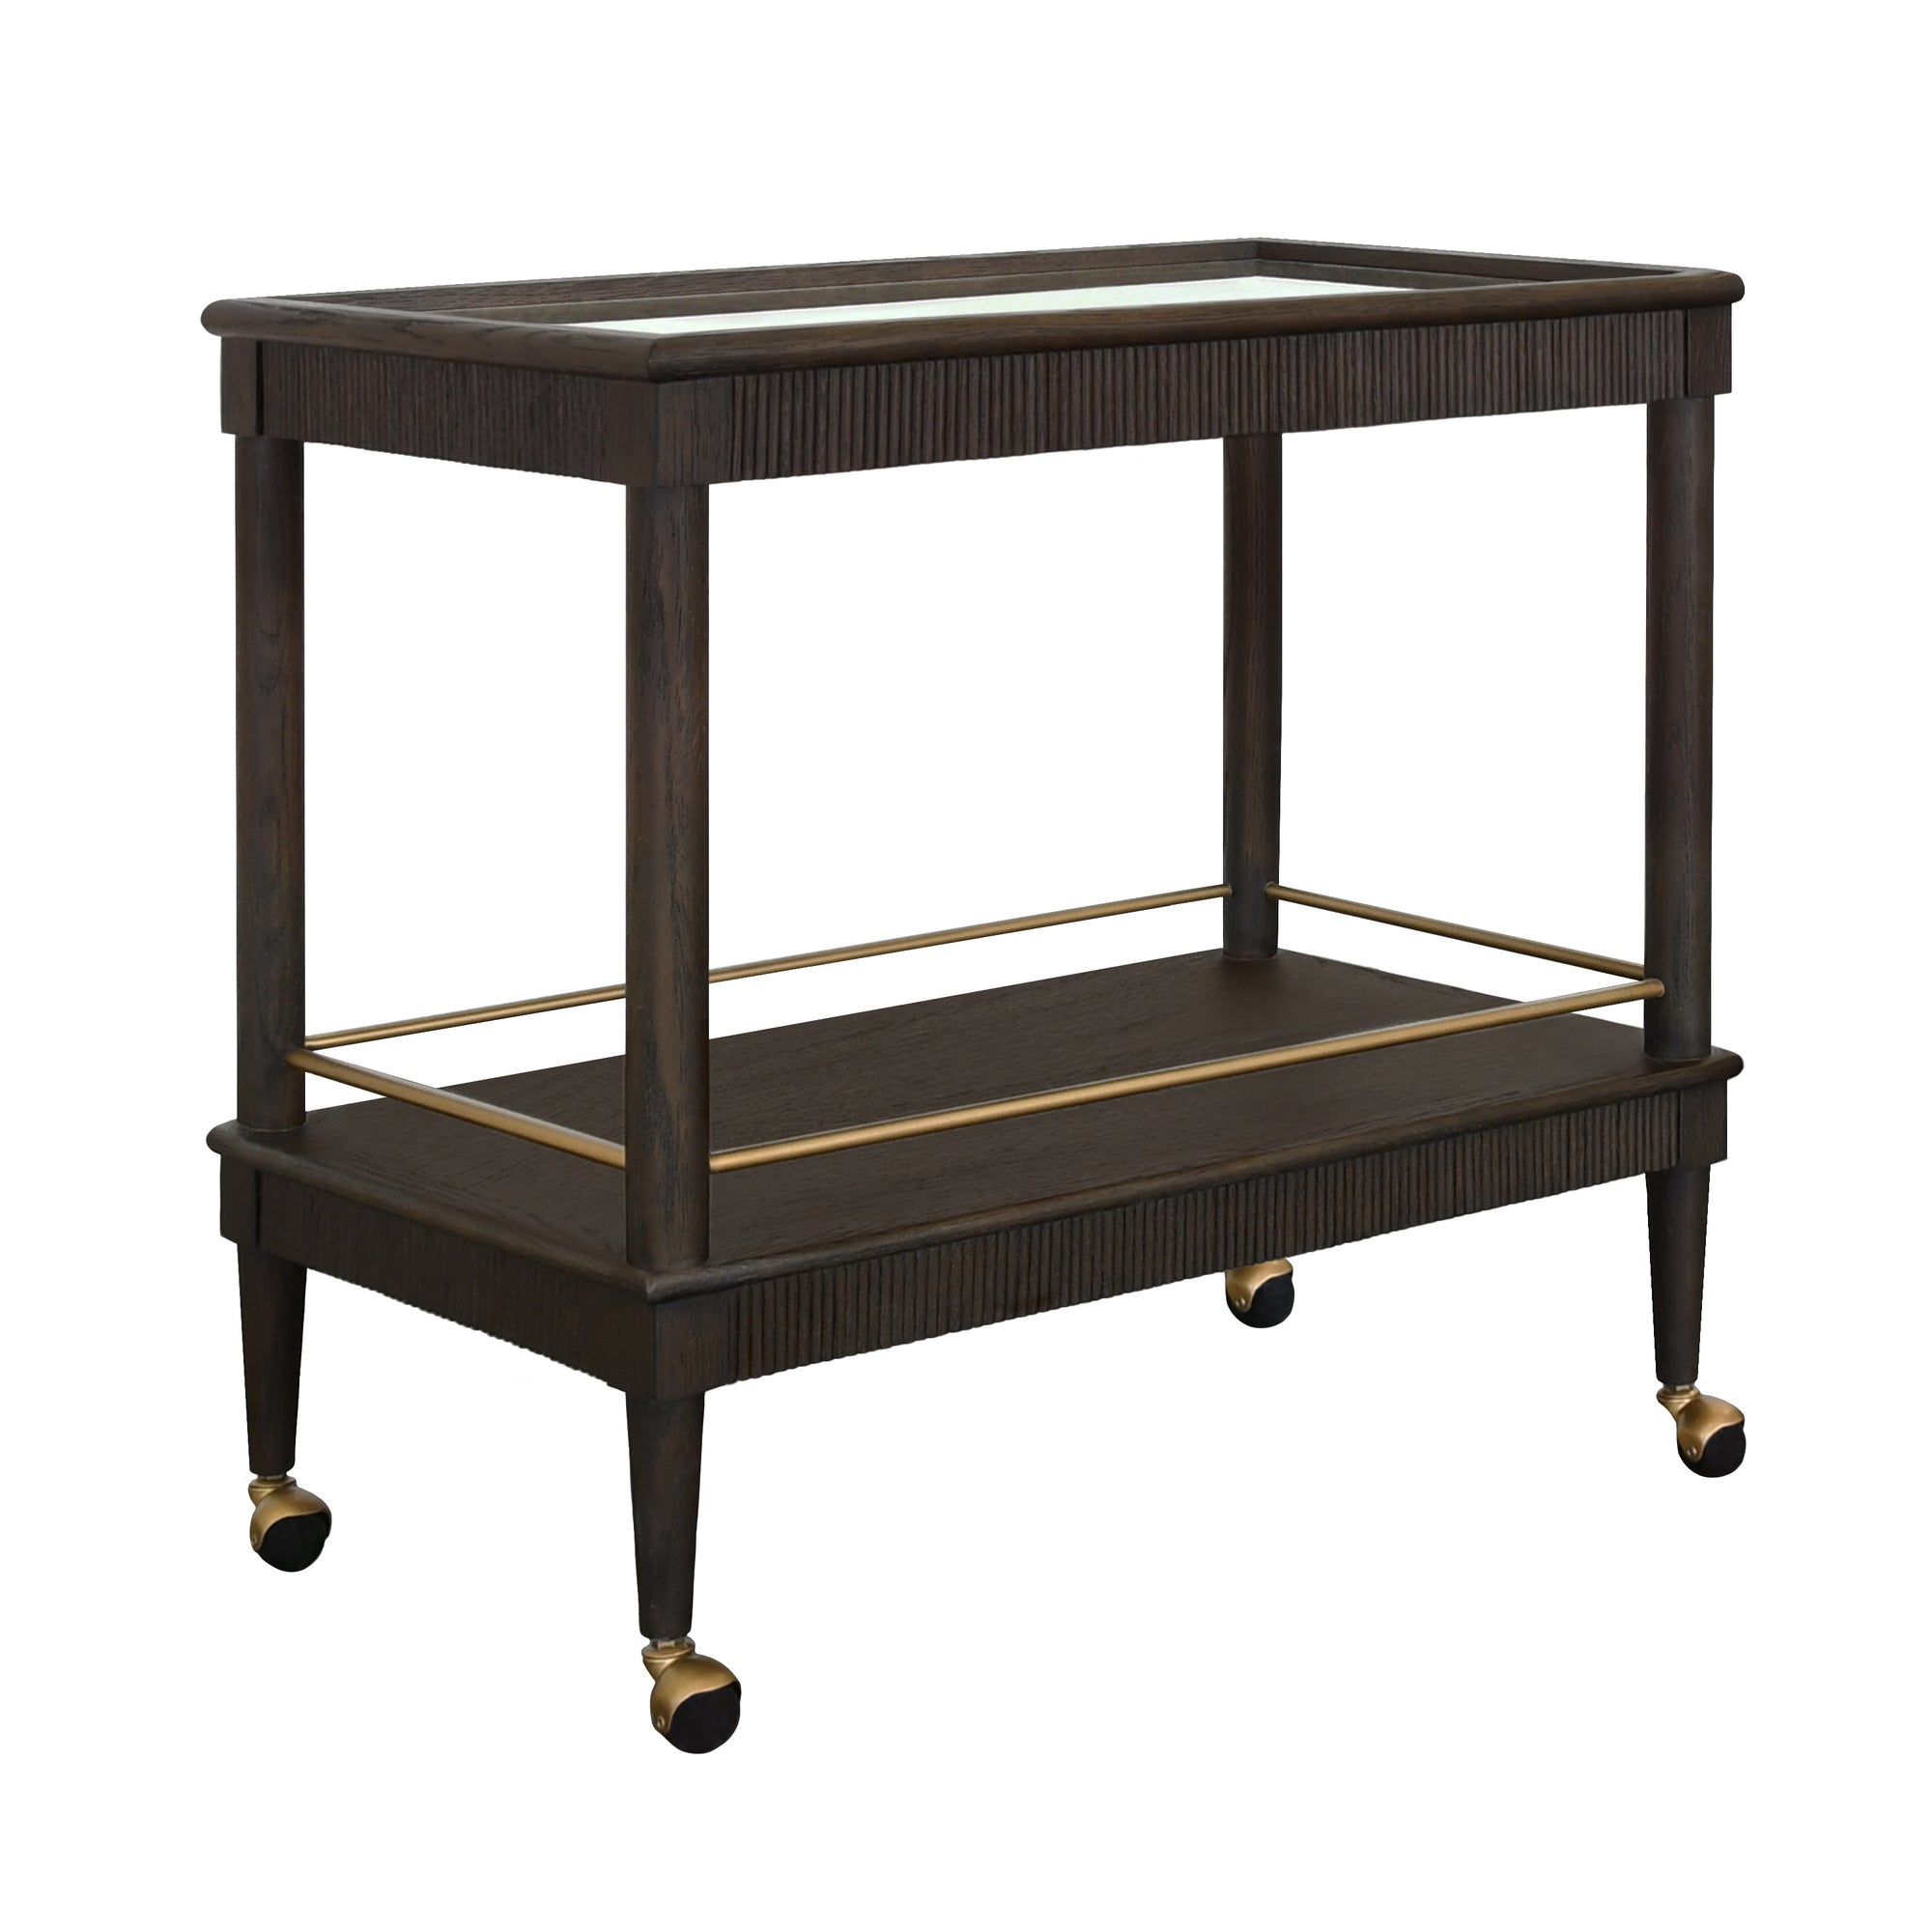 Bar Cart Side View - Dublin Espresso Oak Bar Cart by Worlds Away at Fig Linens and Home